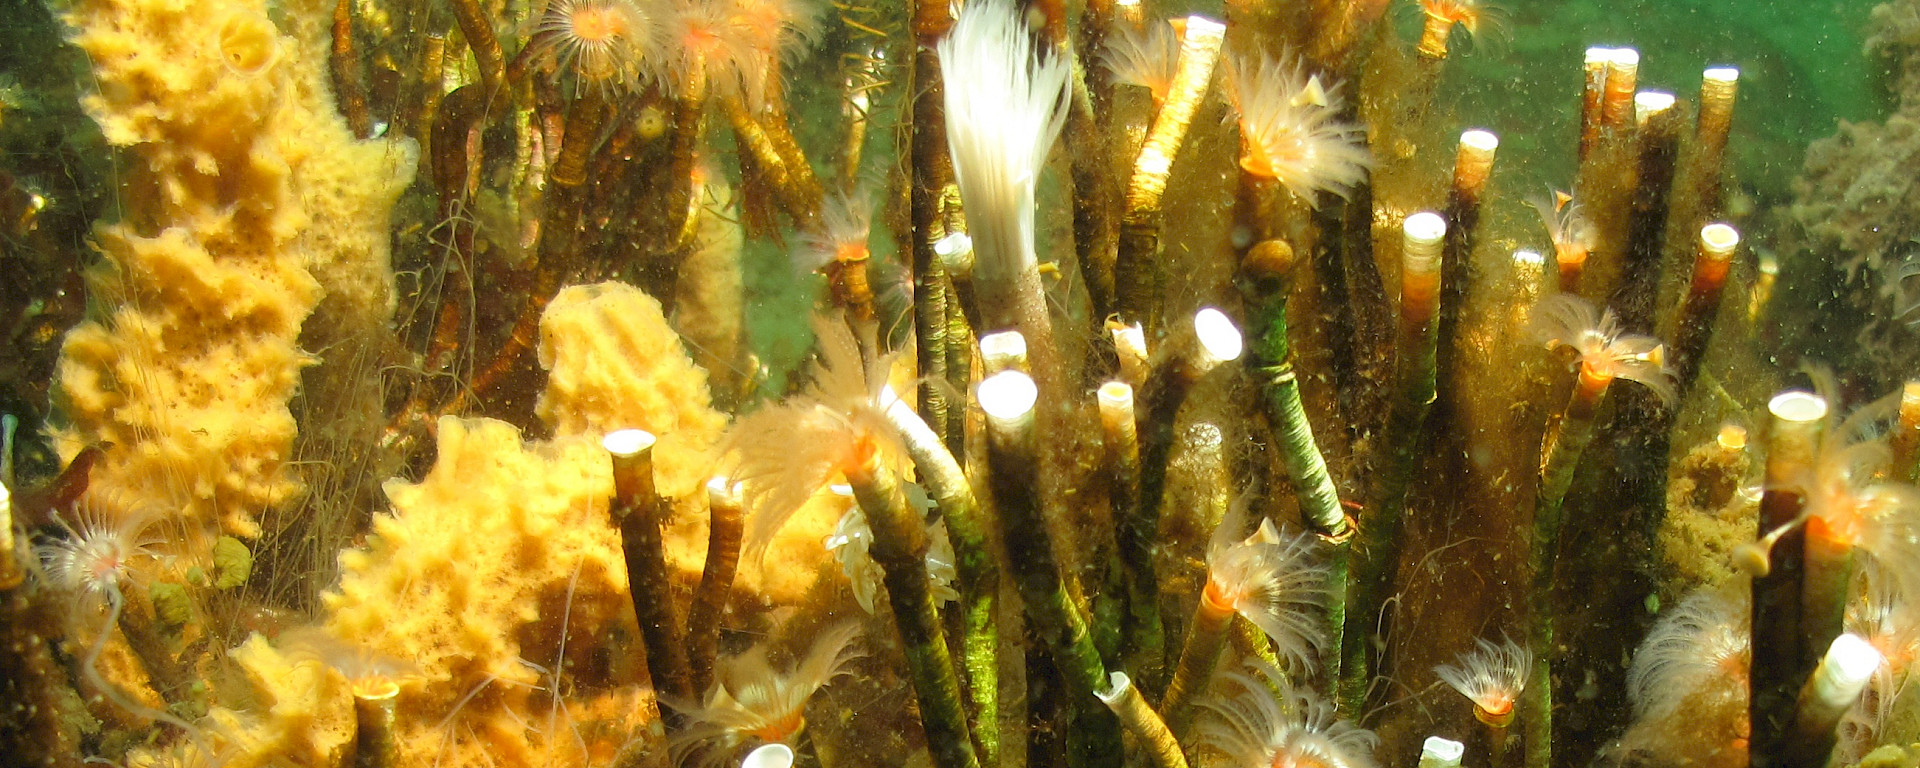 Benthic community of sponges and other invertebrates un yellow and gold colours